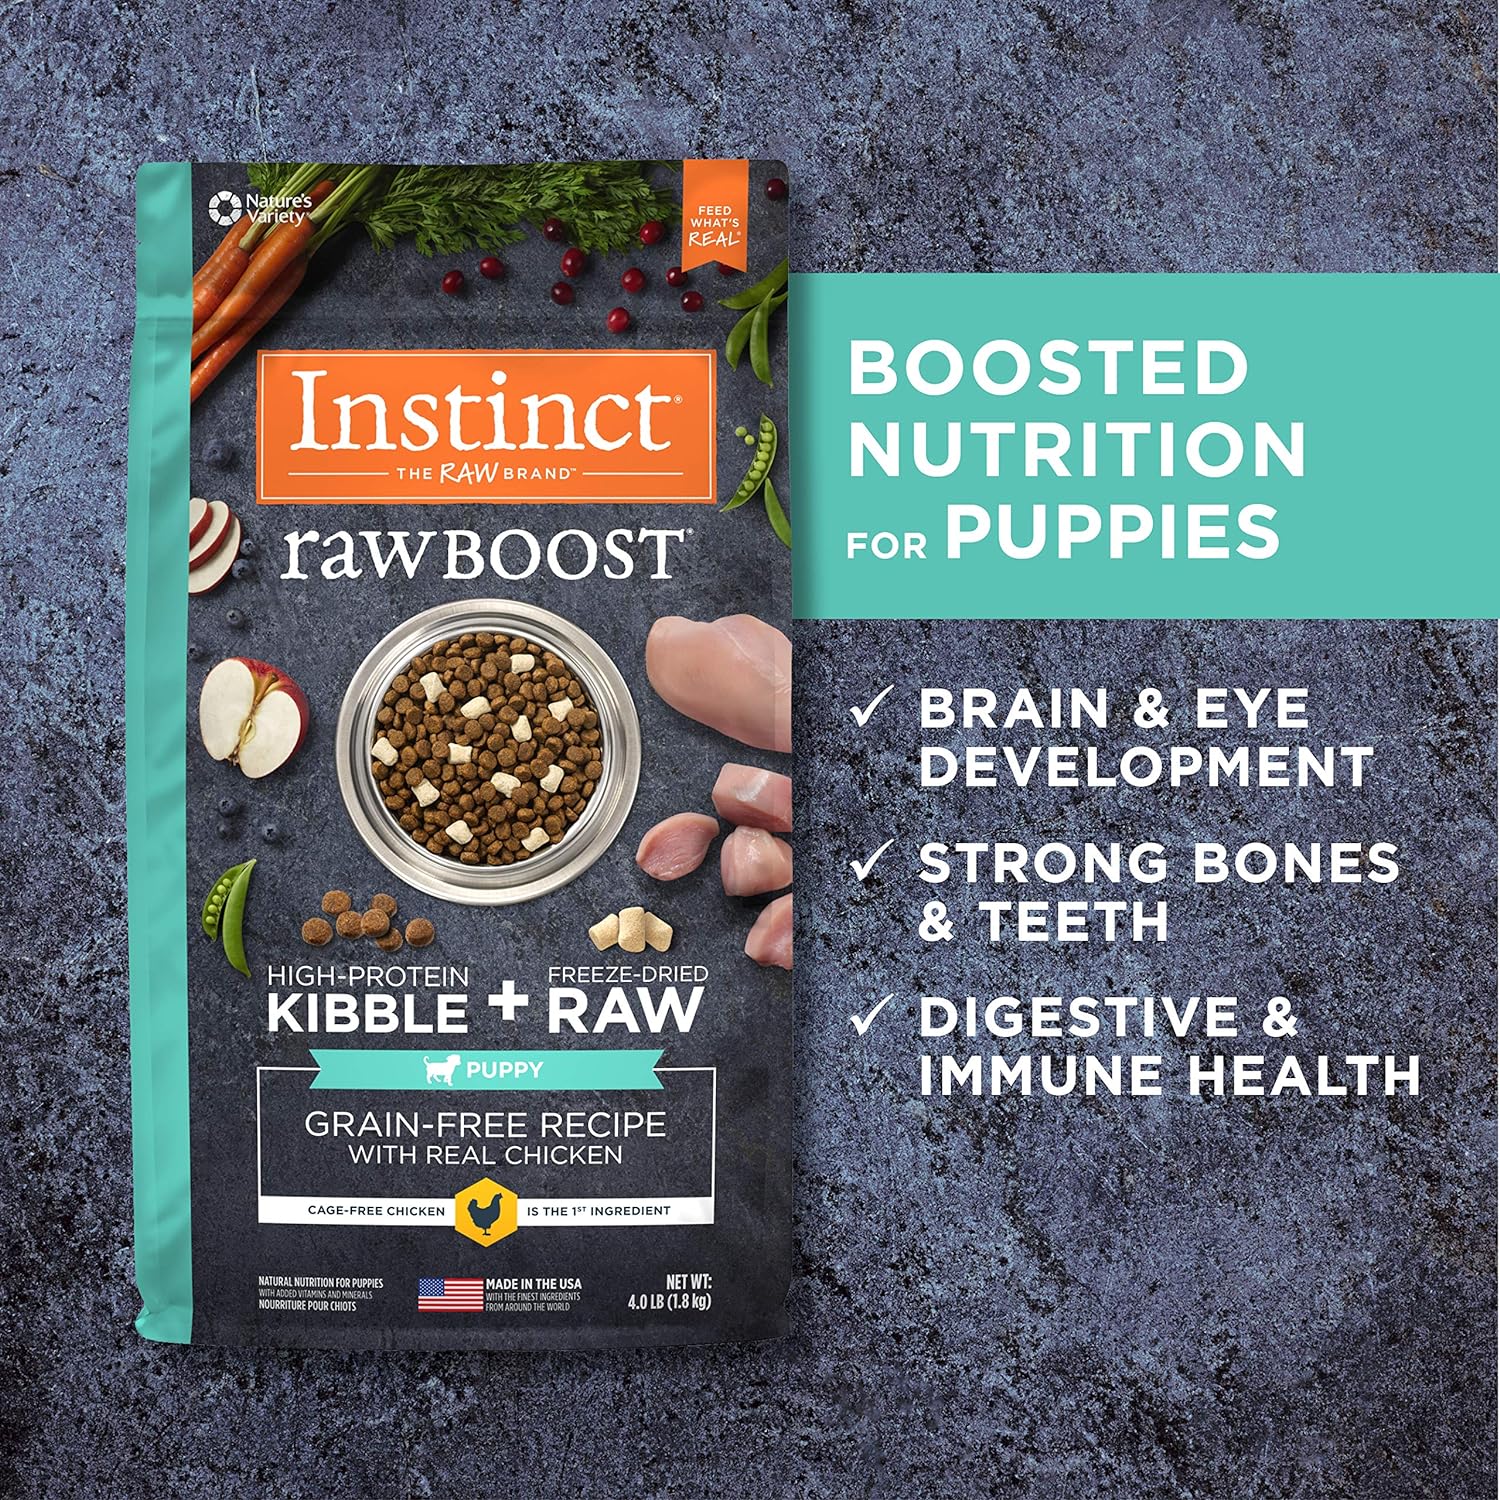 Instinct Raw Boost Grain-Free Recipe with Real Chicken for Puppies Dry Dog Food – Gallery Image 6